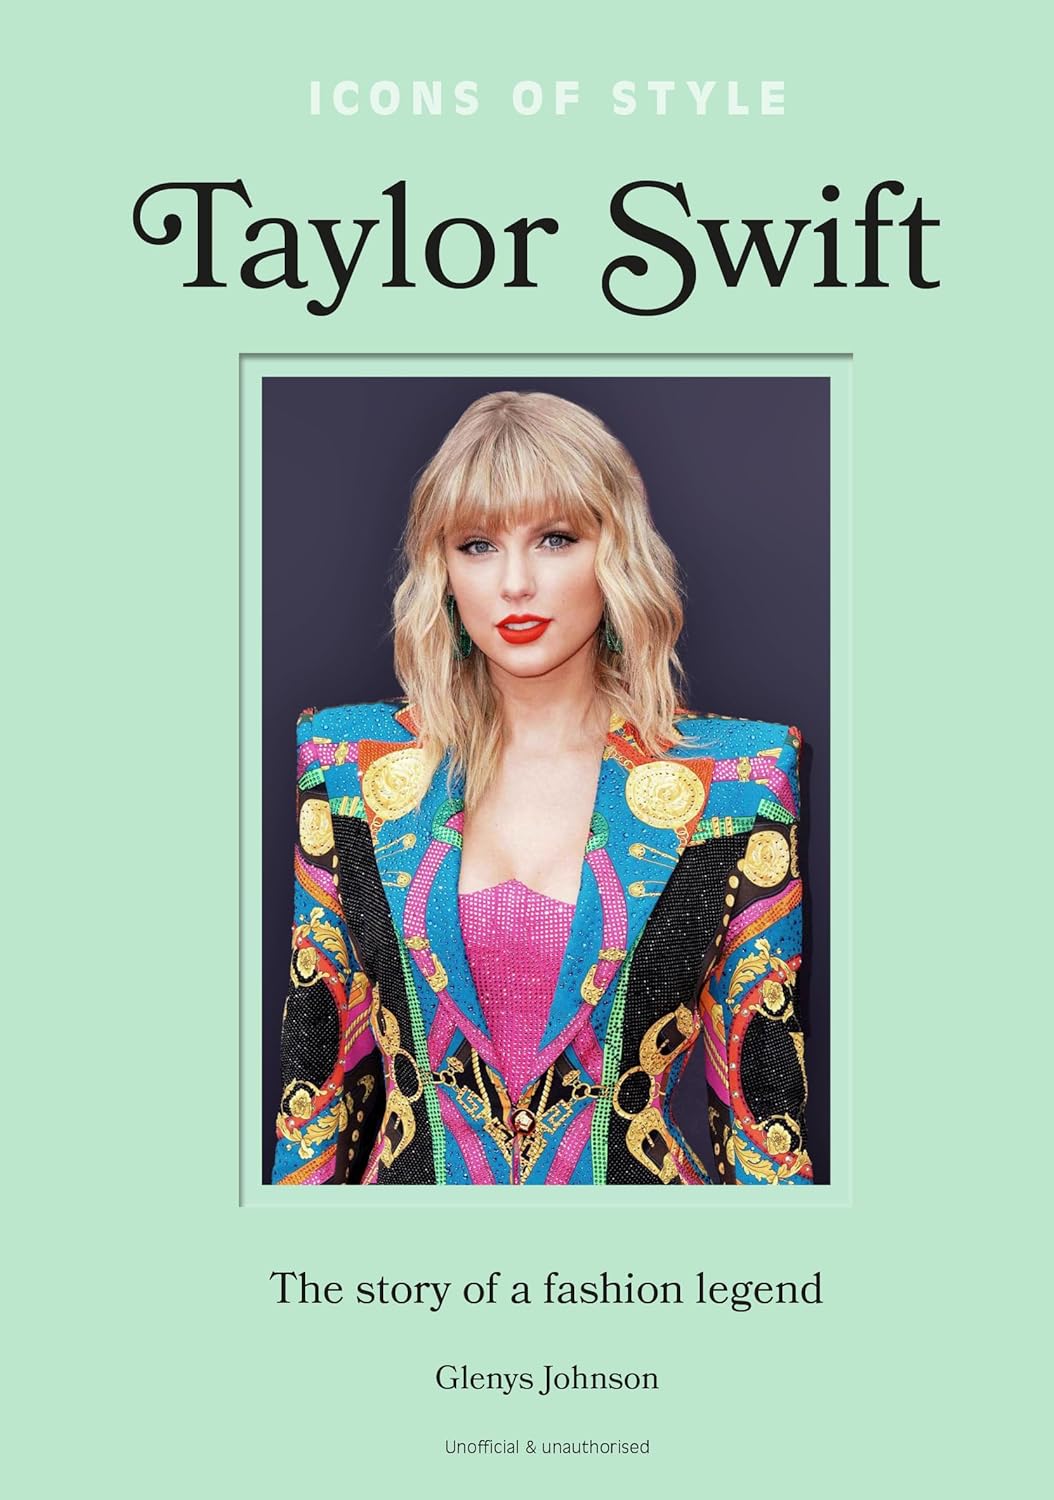 TAYLOR SWIFT ICONS OF STYLE